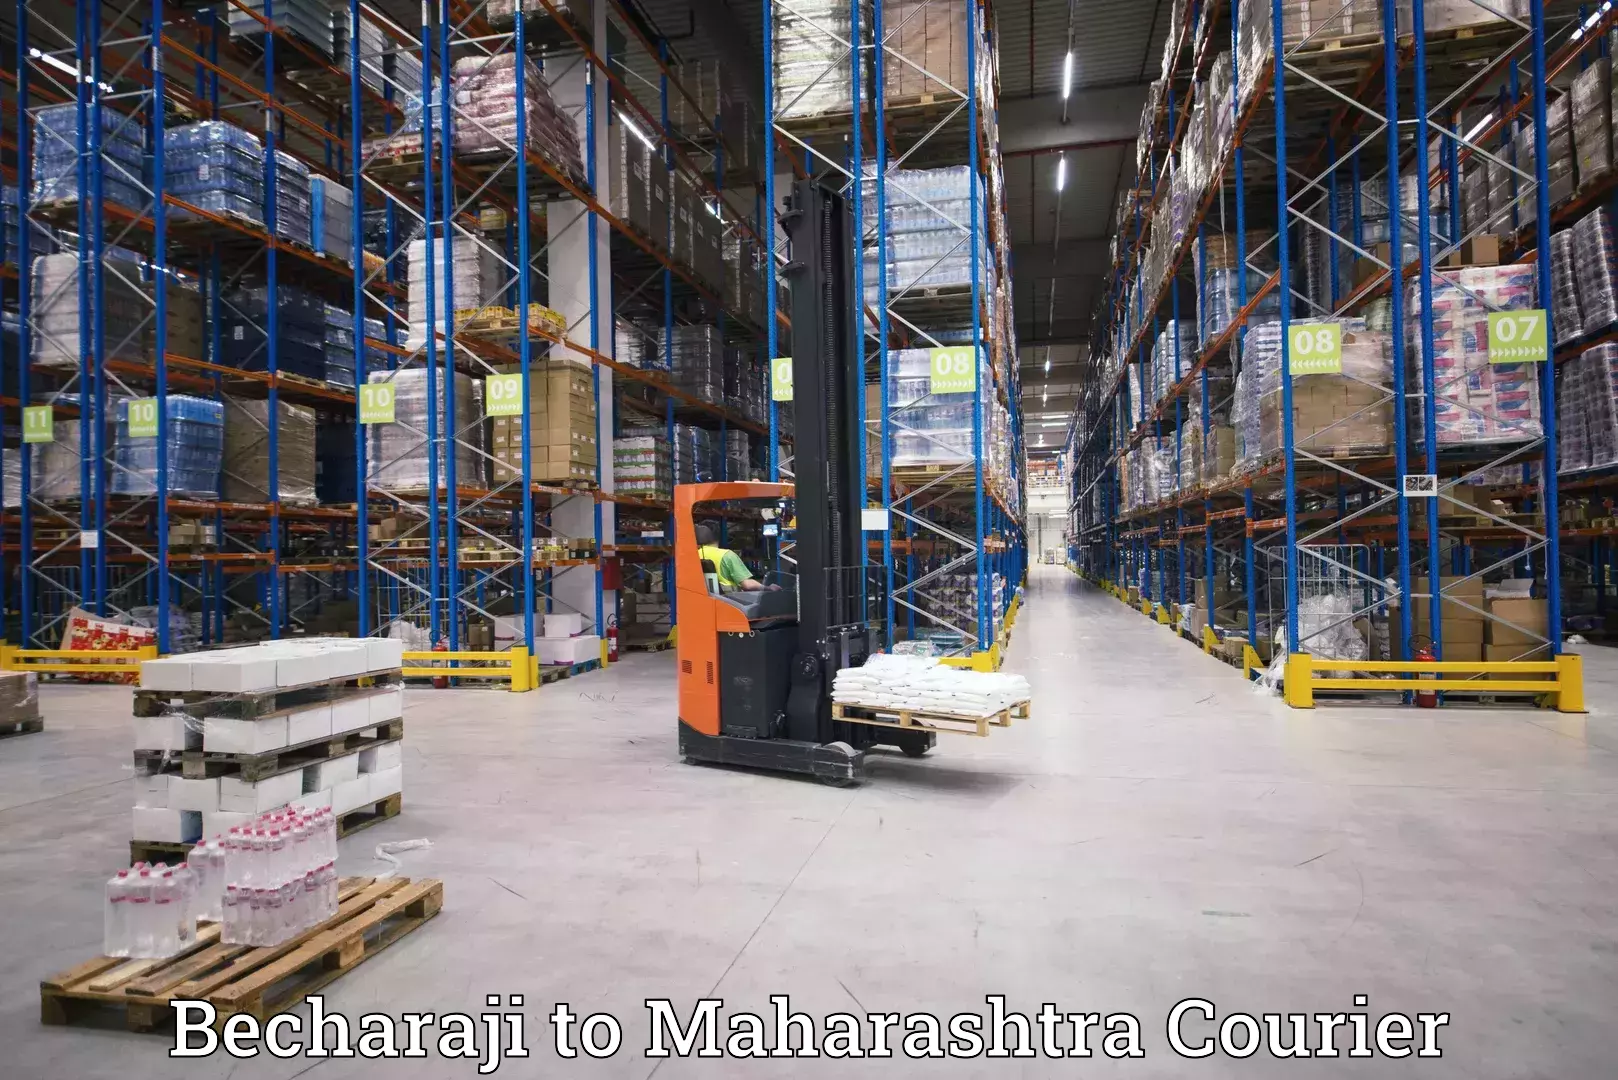 Flexible delivery schedules in Becharaji to Maharashtra